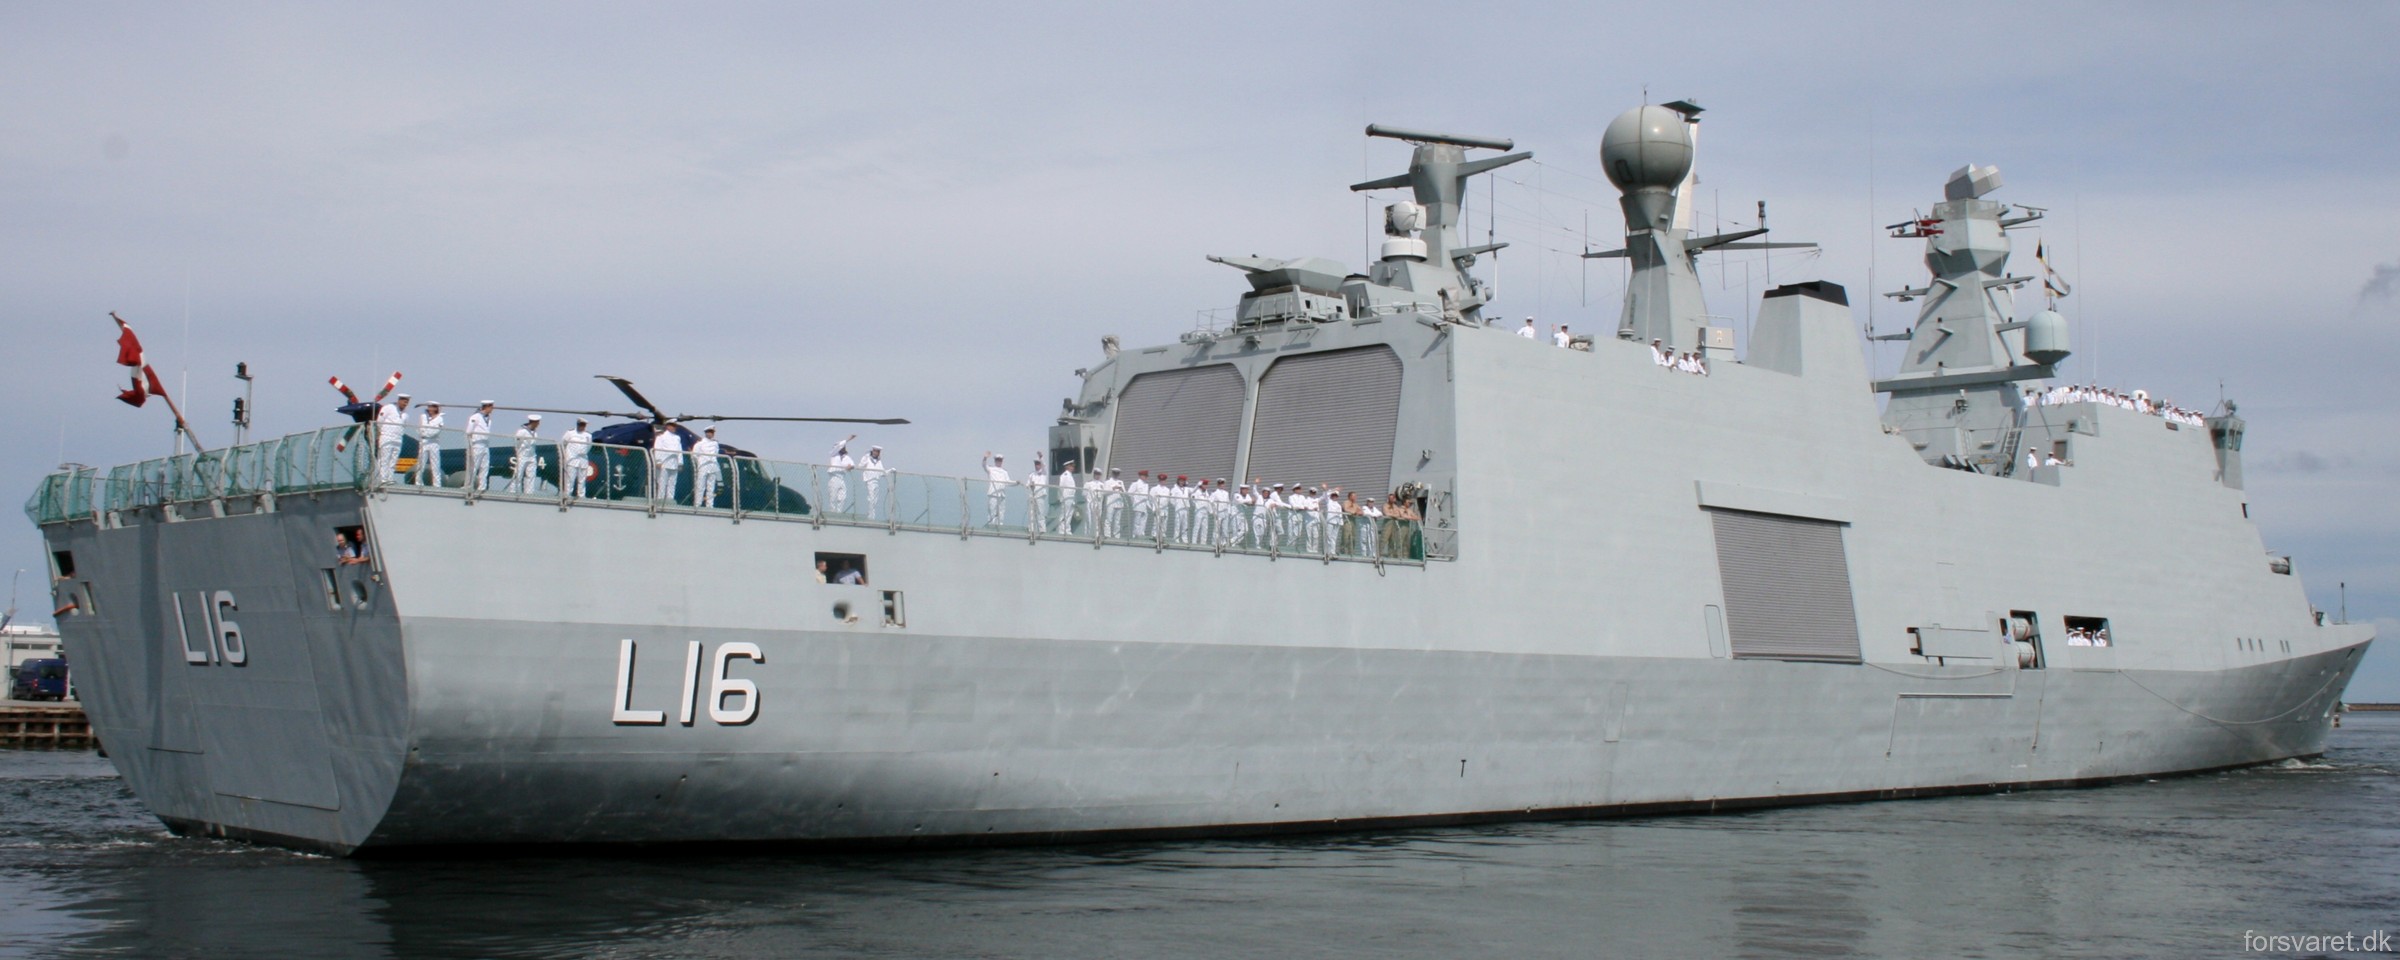 l-16 hdms absalon command support ship frigate royal danish navy 03